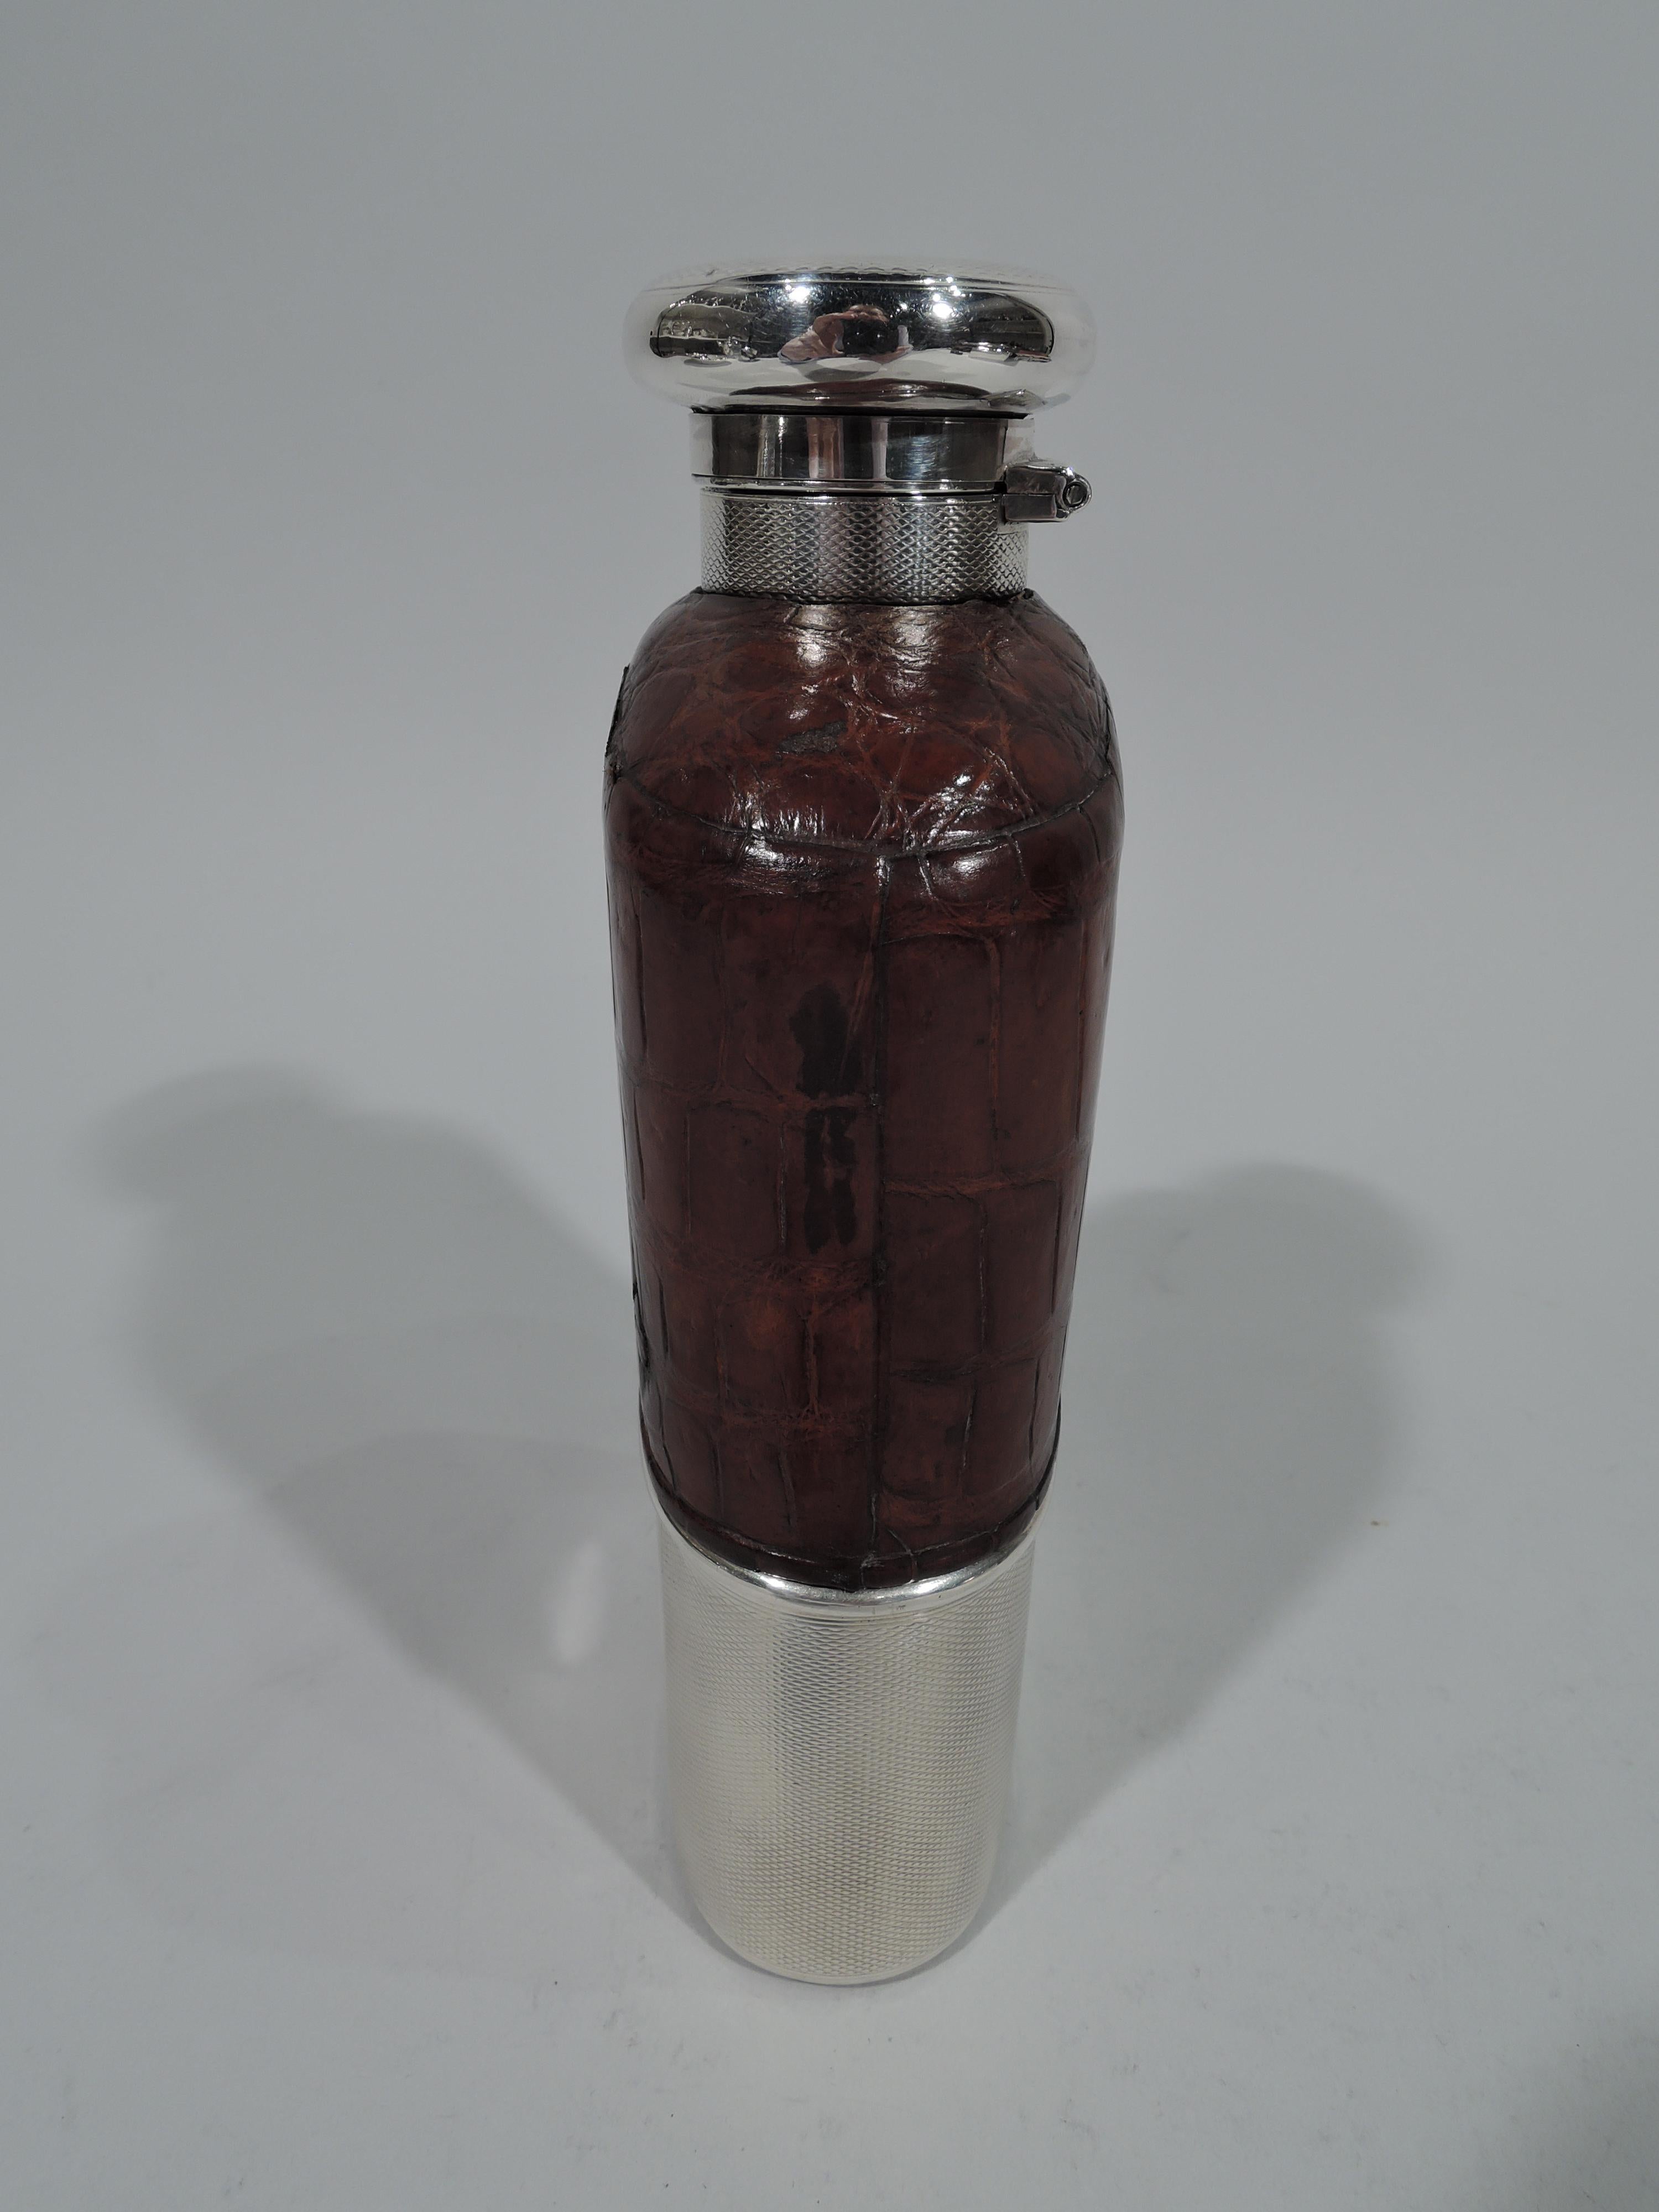 George V sterling silver and leather safari flask. Made by Asprey in London in 1916. Flask is clear glass. Top part encased in leather with cutaway vertical windows to measure how much booze is left. Bottom is detachable and engine-turned sterling